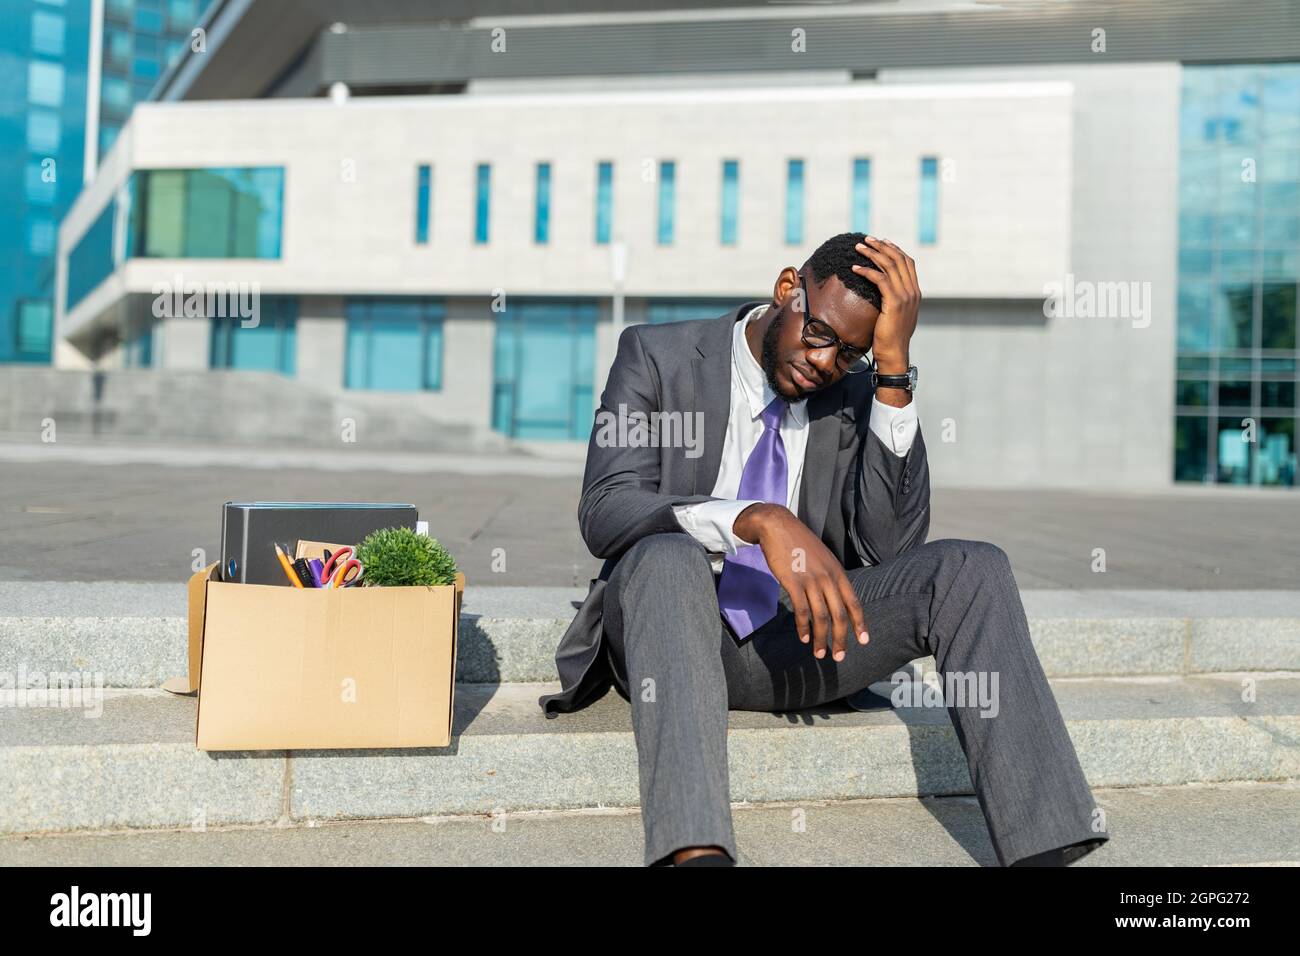 Unemployment concept. Disappointed black businessman sitting with box of personal stuff on stairs against office center Stock Photo